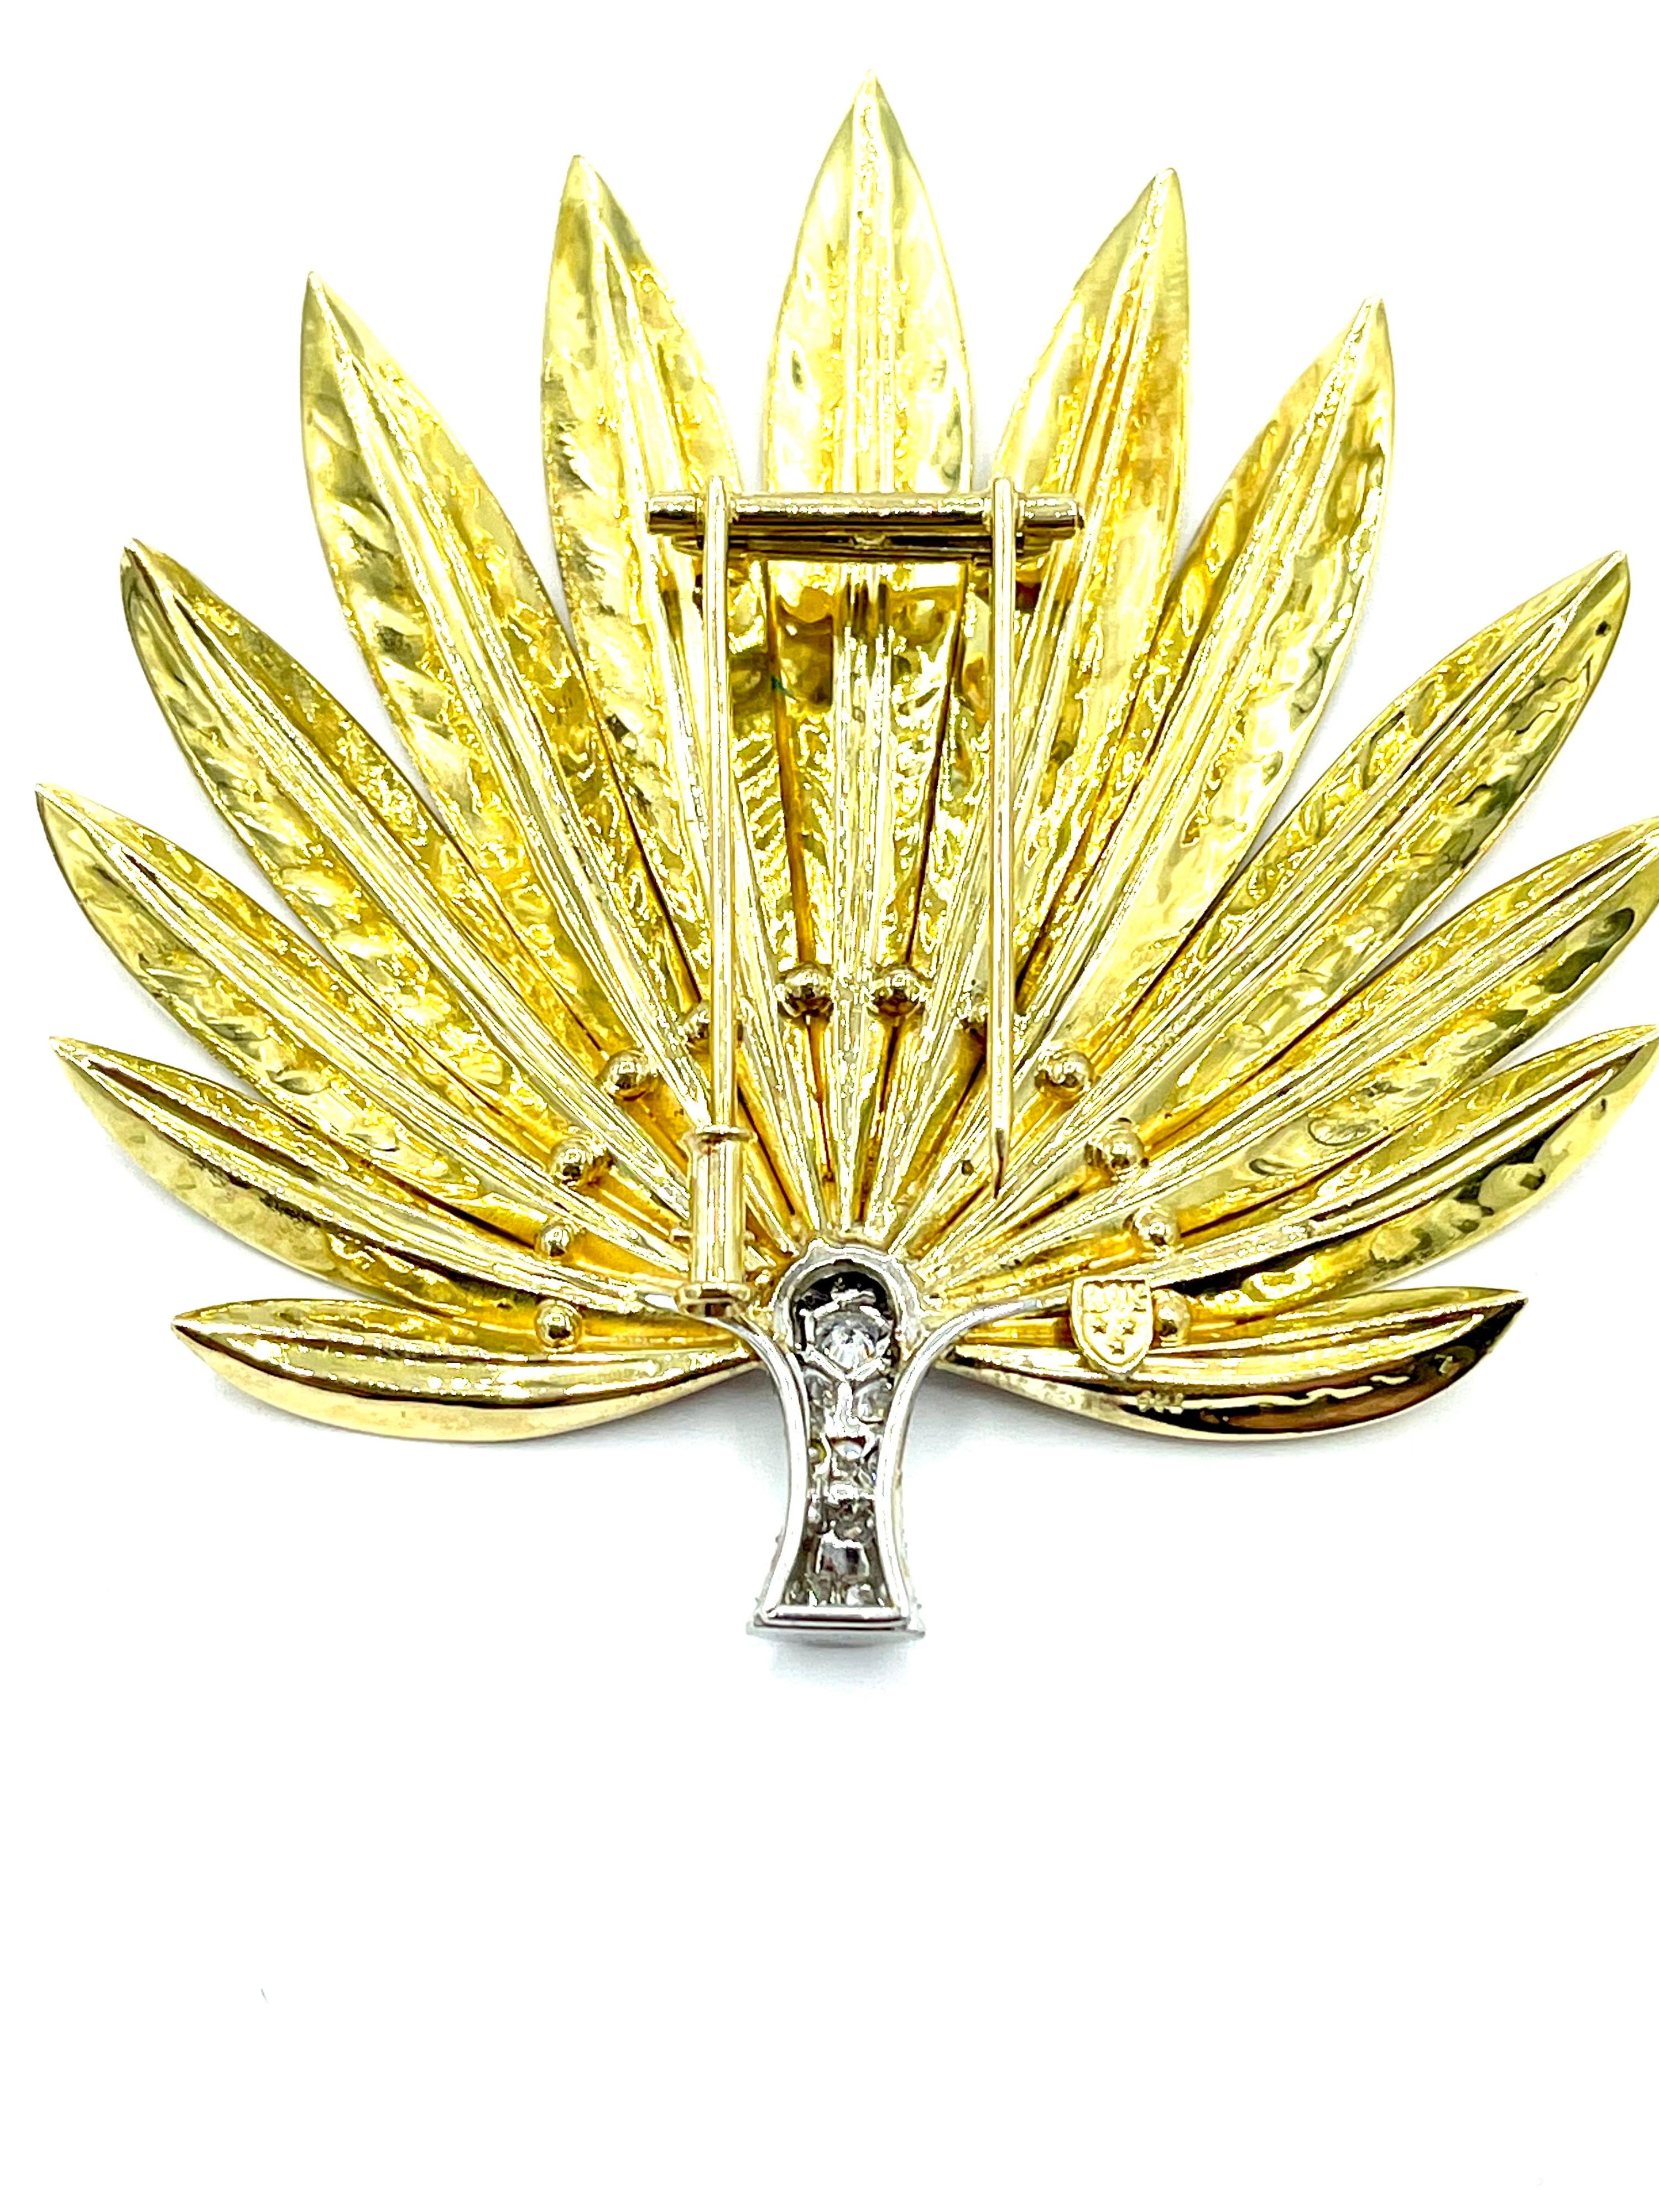 0.90 Carat Round Brilliant Diamond and 18K Gold & Platinum Feathered Fan Brooch For Sale 3